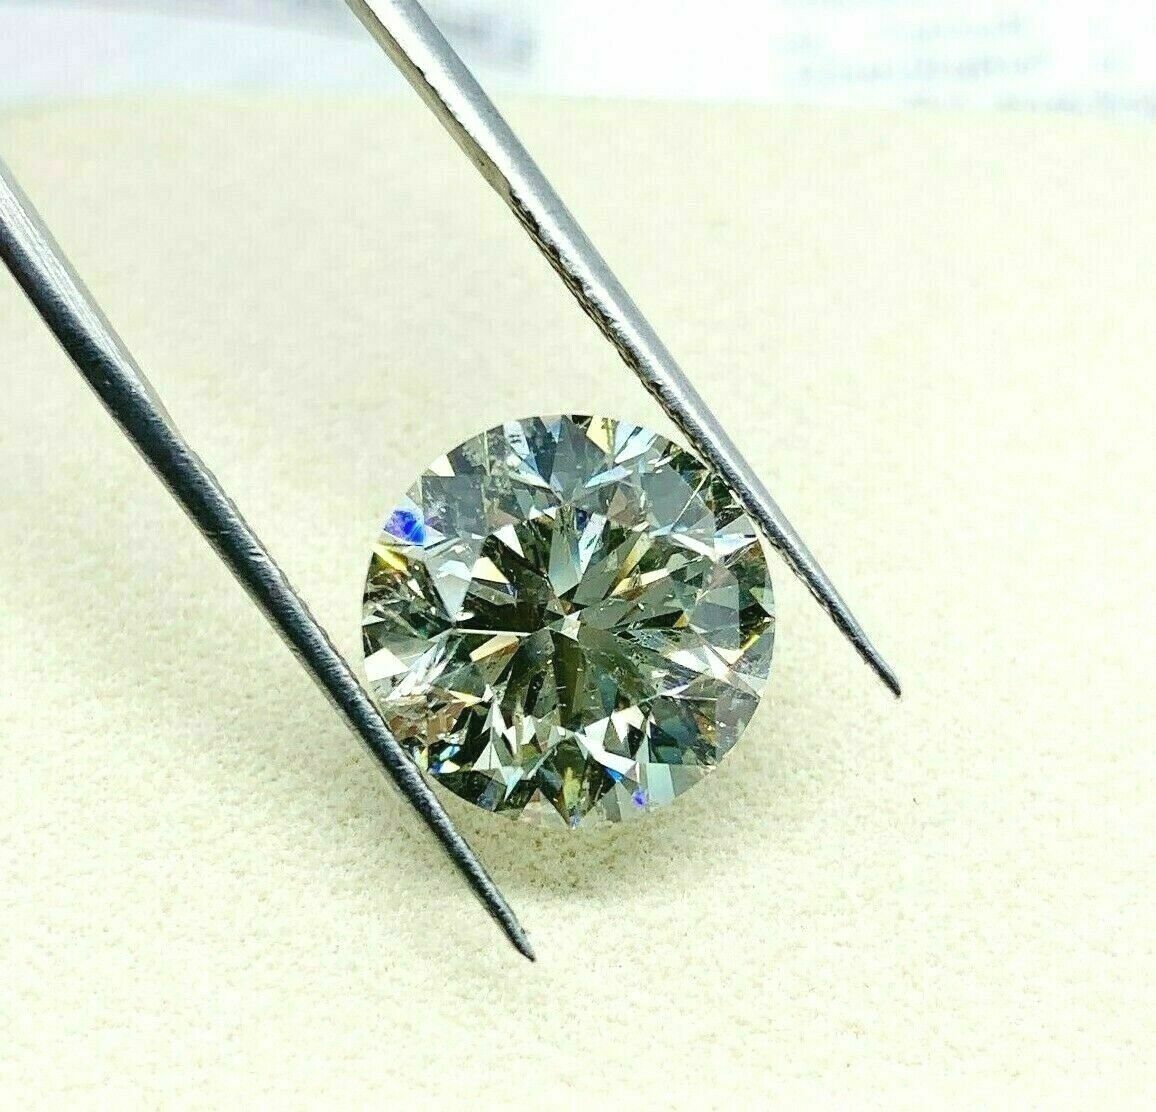 Loose AGS Diamond Very Large 6.99 Carats Round Brilliant Cut M SI2 12mm Diameter